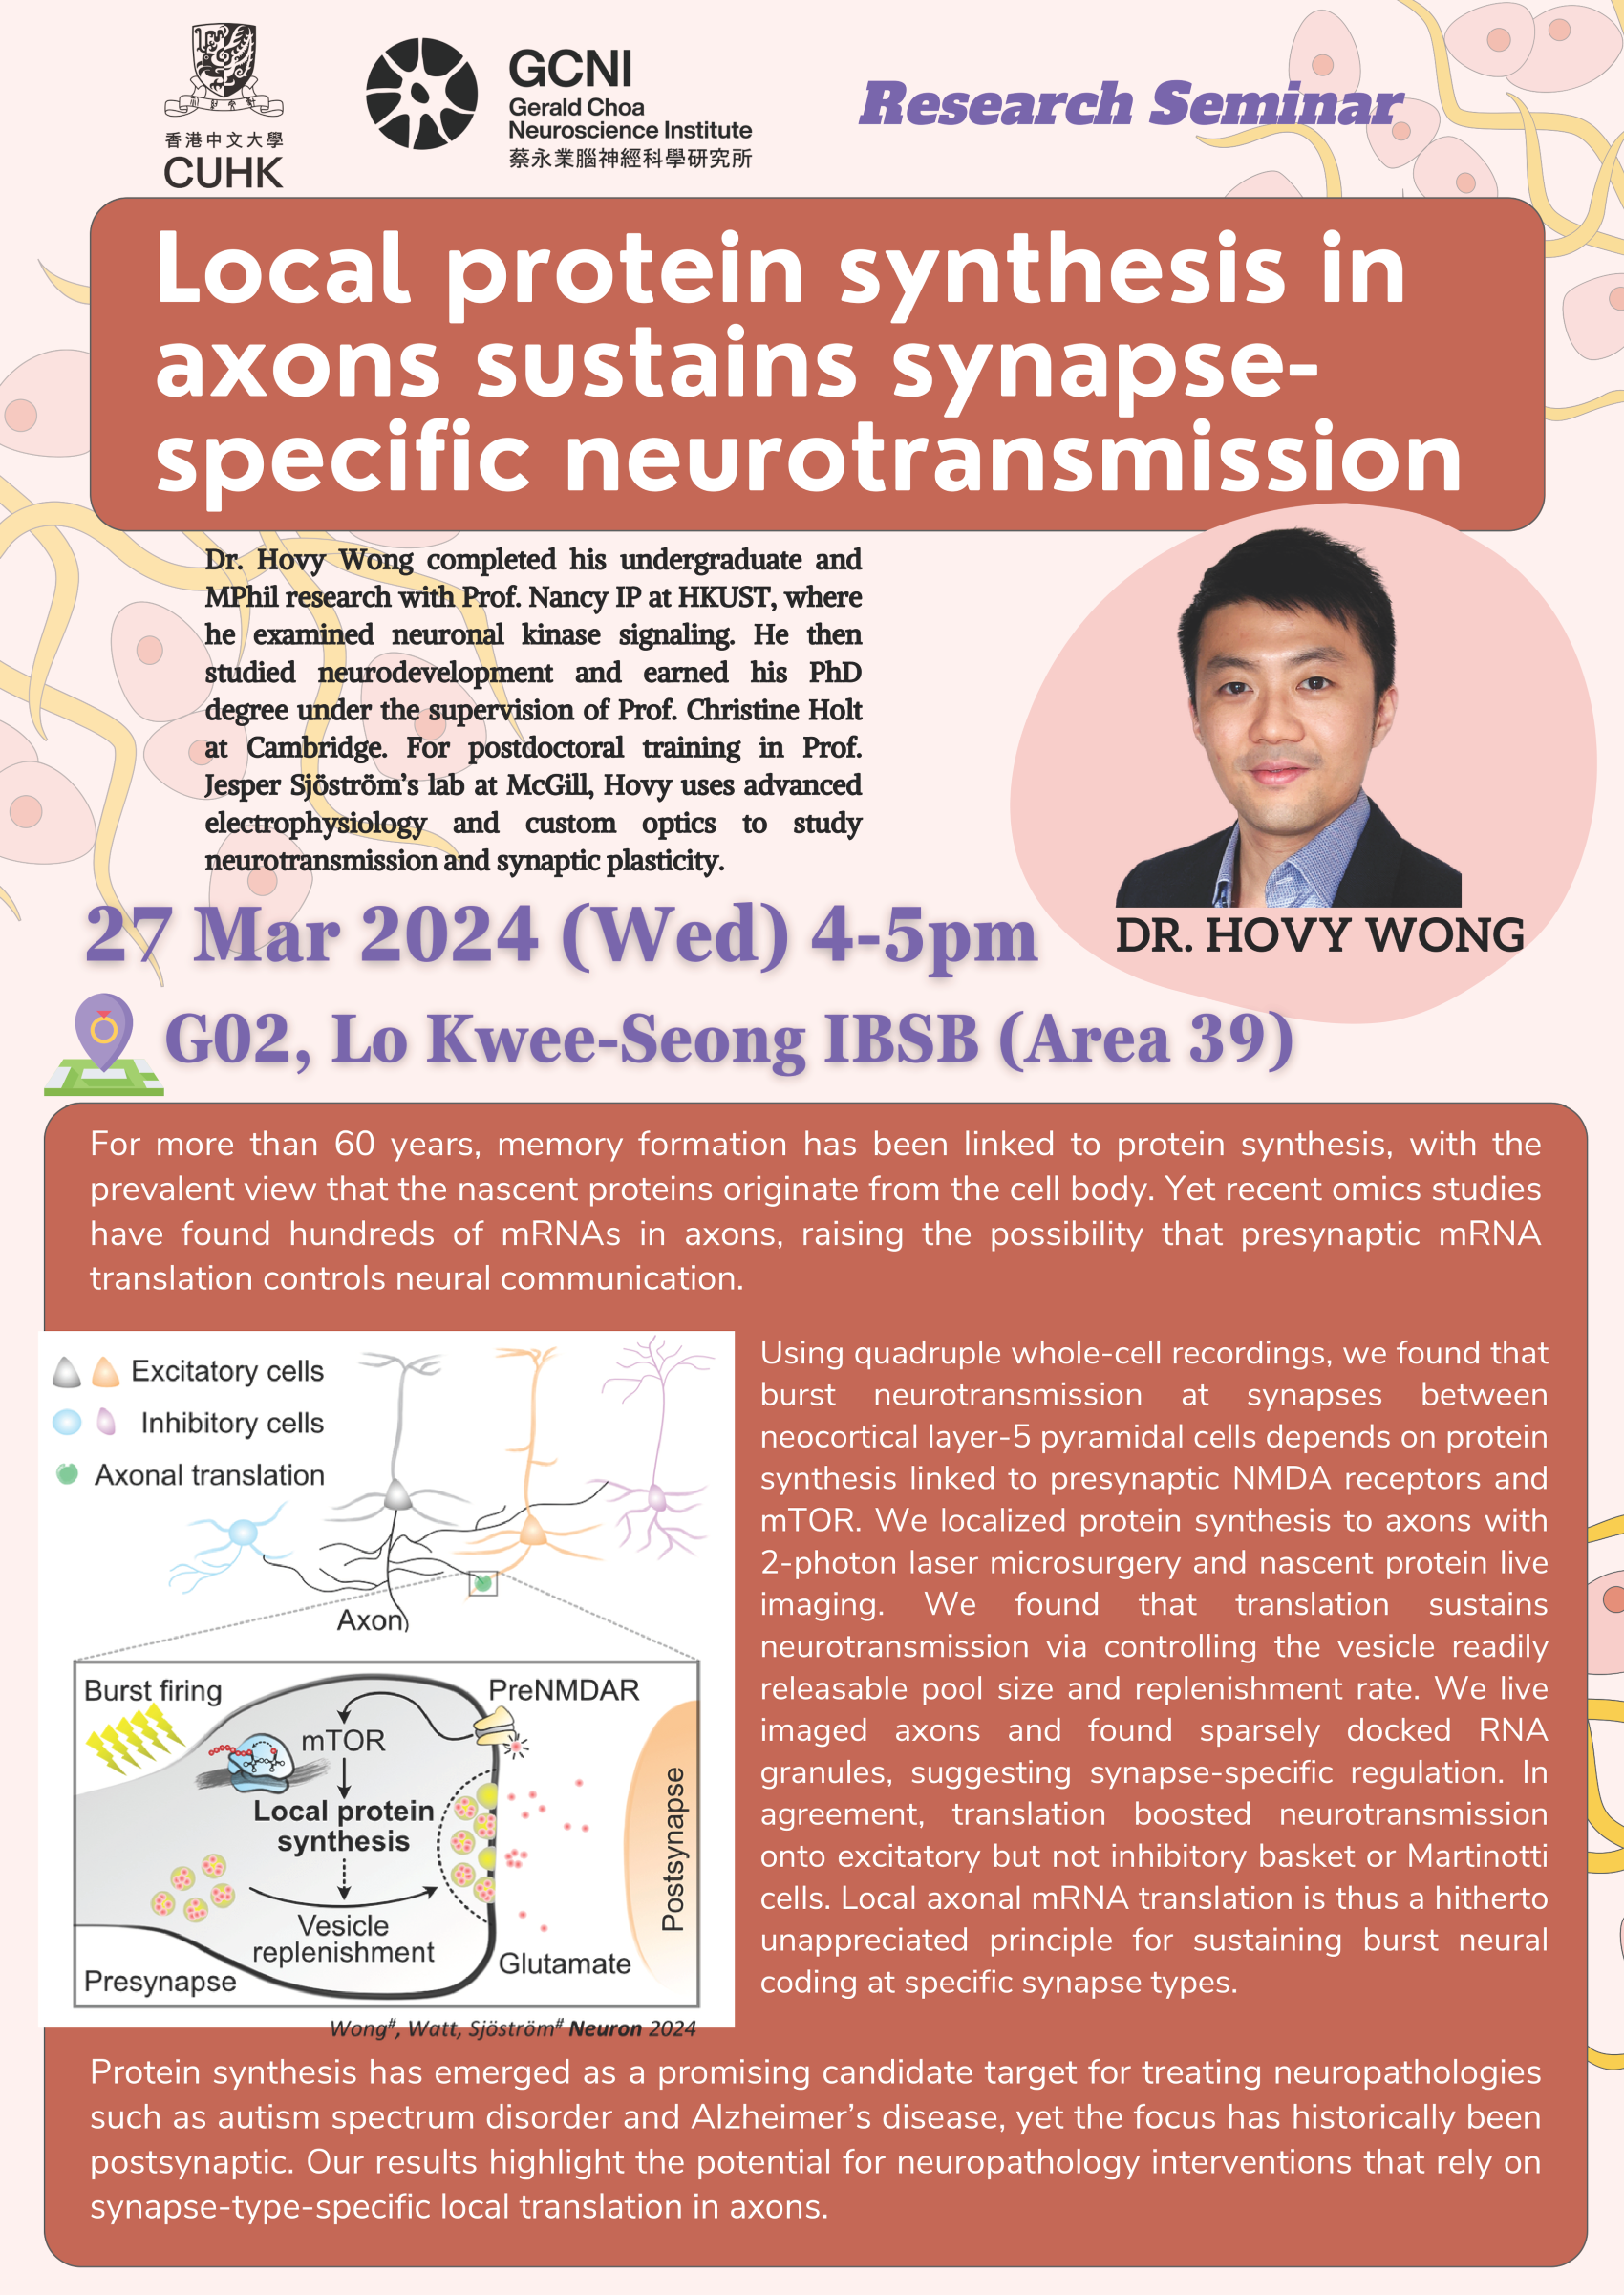 Research Seminar: Local protein synthesis in axons sustains synapse-specific neurotransmission